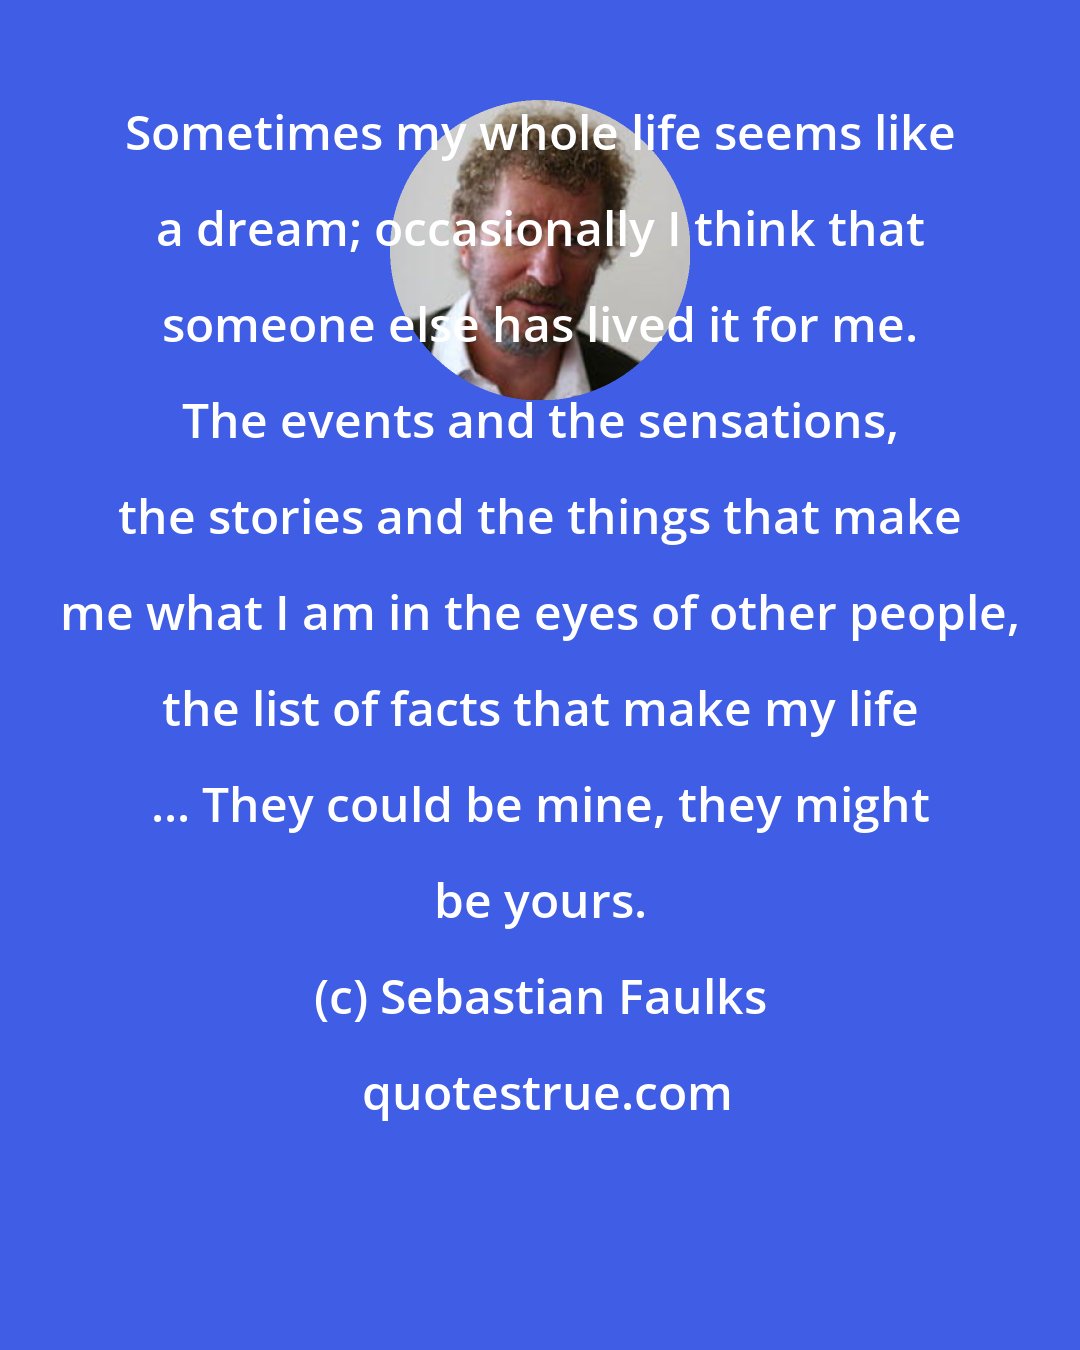 Sebastian Faulks: Sometimes my whole life seems like a dream; occasionally I think that someone else has lived it for me. The events and the sensations, the stories and the things that make me what I am in the eyes of other people, the list of facts that make my life ... They could be mine, they might be yours.